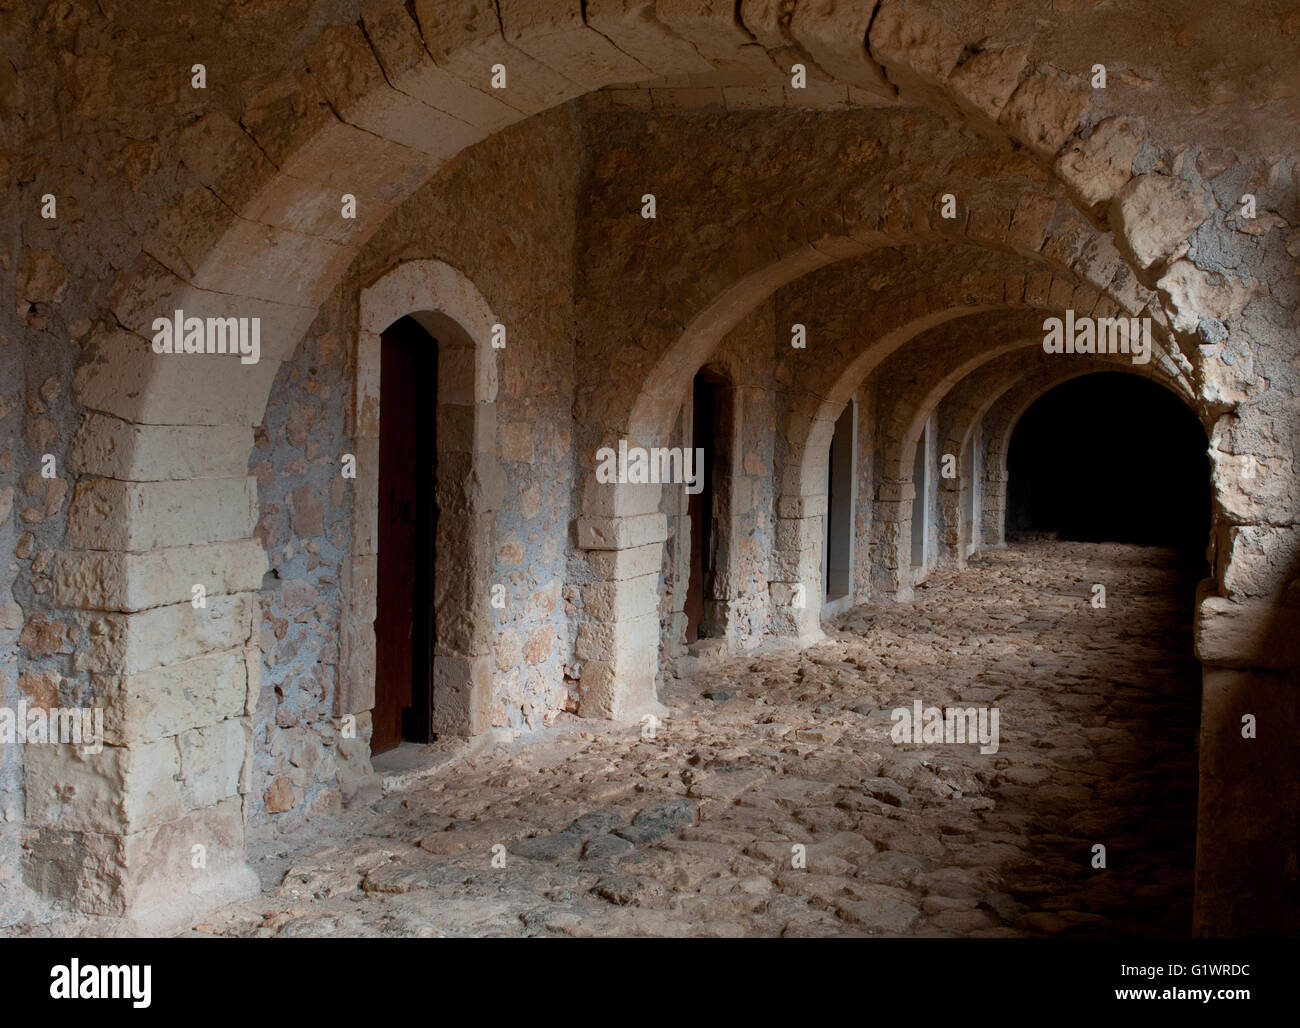 Ancient passage leading to priest rooms in the Famous Arkadi Christian orthodox monastery in Crete, Greece Stock Photo